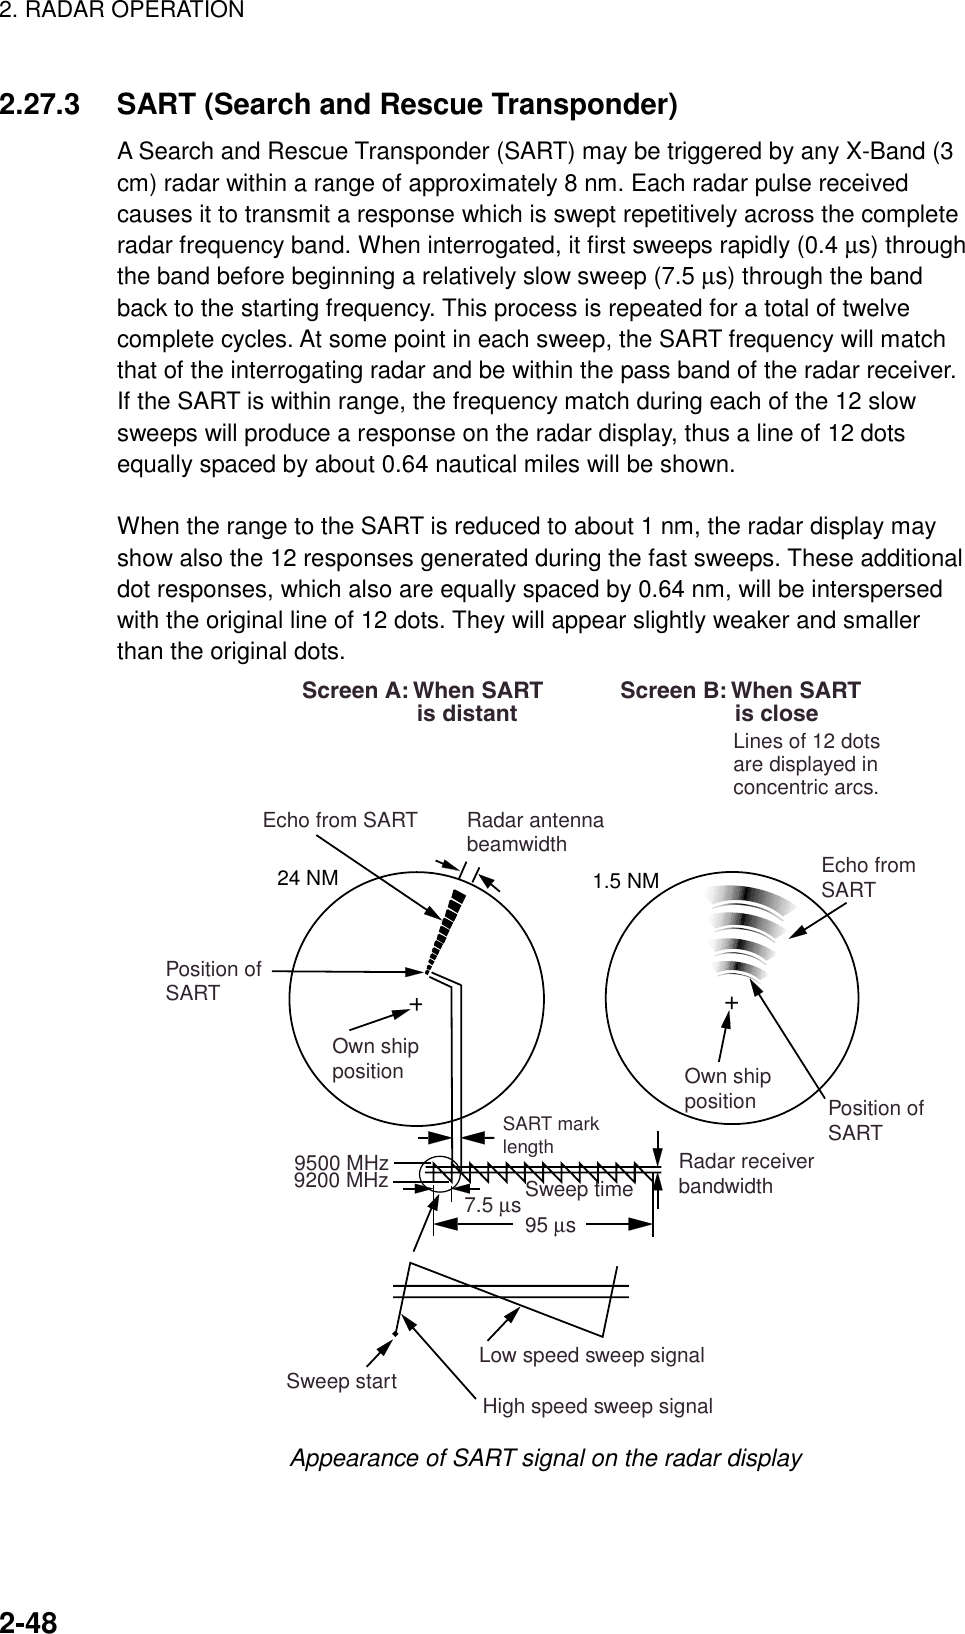 2. RADAR OPERATION    2-482.27.3  SART (Search and Rescue Transponder) A Search and Rescue Transponder (SART) may be triggered by any X-Band (3 cm) radar within a range of approximately 8 nm. Each radar pulse received causes it to transmit a response which is swept repetitively across the complete radar frequency band. When interrogated, it first sweeps rapidly (0.4 µs) through the band before beginning a relatively slow sweep (7.5 µs) through the band back to the starting frequency. This process is repeated for a total of twelve complete cycles. At some point in each sweep, the SART frequency will match that of the interrogating radar and be within the pass band of the radar receiver. If the SART is within range, the frequency match during each of the 12 slow sweeps will produce a response on the radar display, thus a line of 12 dots equally spaced by about 0.64 nautical miles will be shown.  When the range to the SART is reduced to about 1 nm, the radar display may show also the 12 responses generated during the fast sweeps. These additional dot responses, which also are equally spaced by 0.64 nm, will be interspersed with the original line of 12 dots. They will appear slightly weaker and smaller than the original dots. 9500 MHz9200 MHzRadar antennabeamwidthScreen A: When SART                  is distant Screen B: When SART                  is close Lines of 12 dots are displayed in concentric arcs.Echo from SARTPosition ofSARTOwn shipposition Own shippositionSART marklength Radar receiverbandwidthSweep time7.5 µs 95 µs Sweep start High speed sweep signalLow speed sweep signal24 NM 1.5 NMPosition ofSARTEcho fromSART Appearance of SART signal on the radar display  